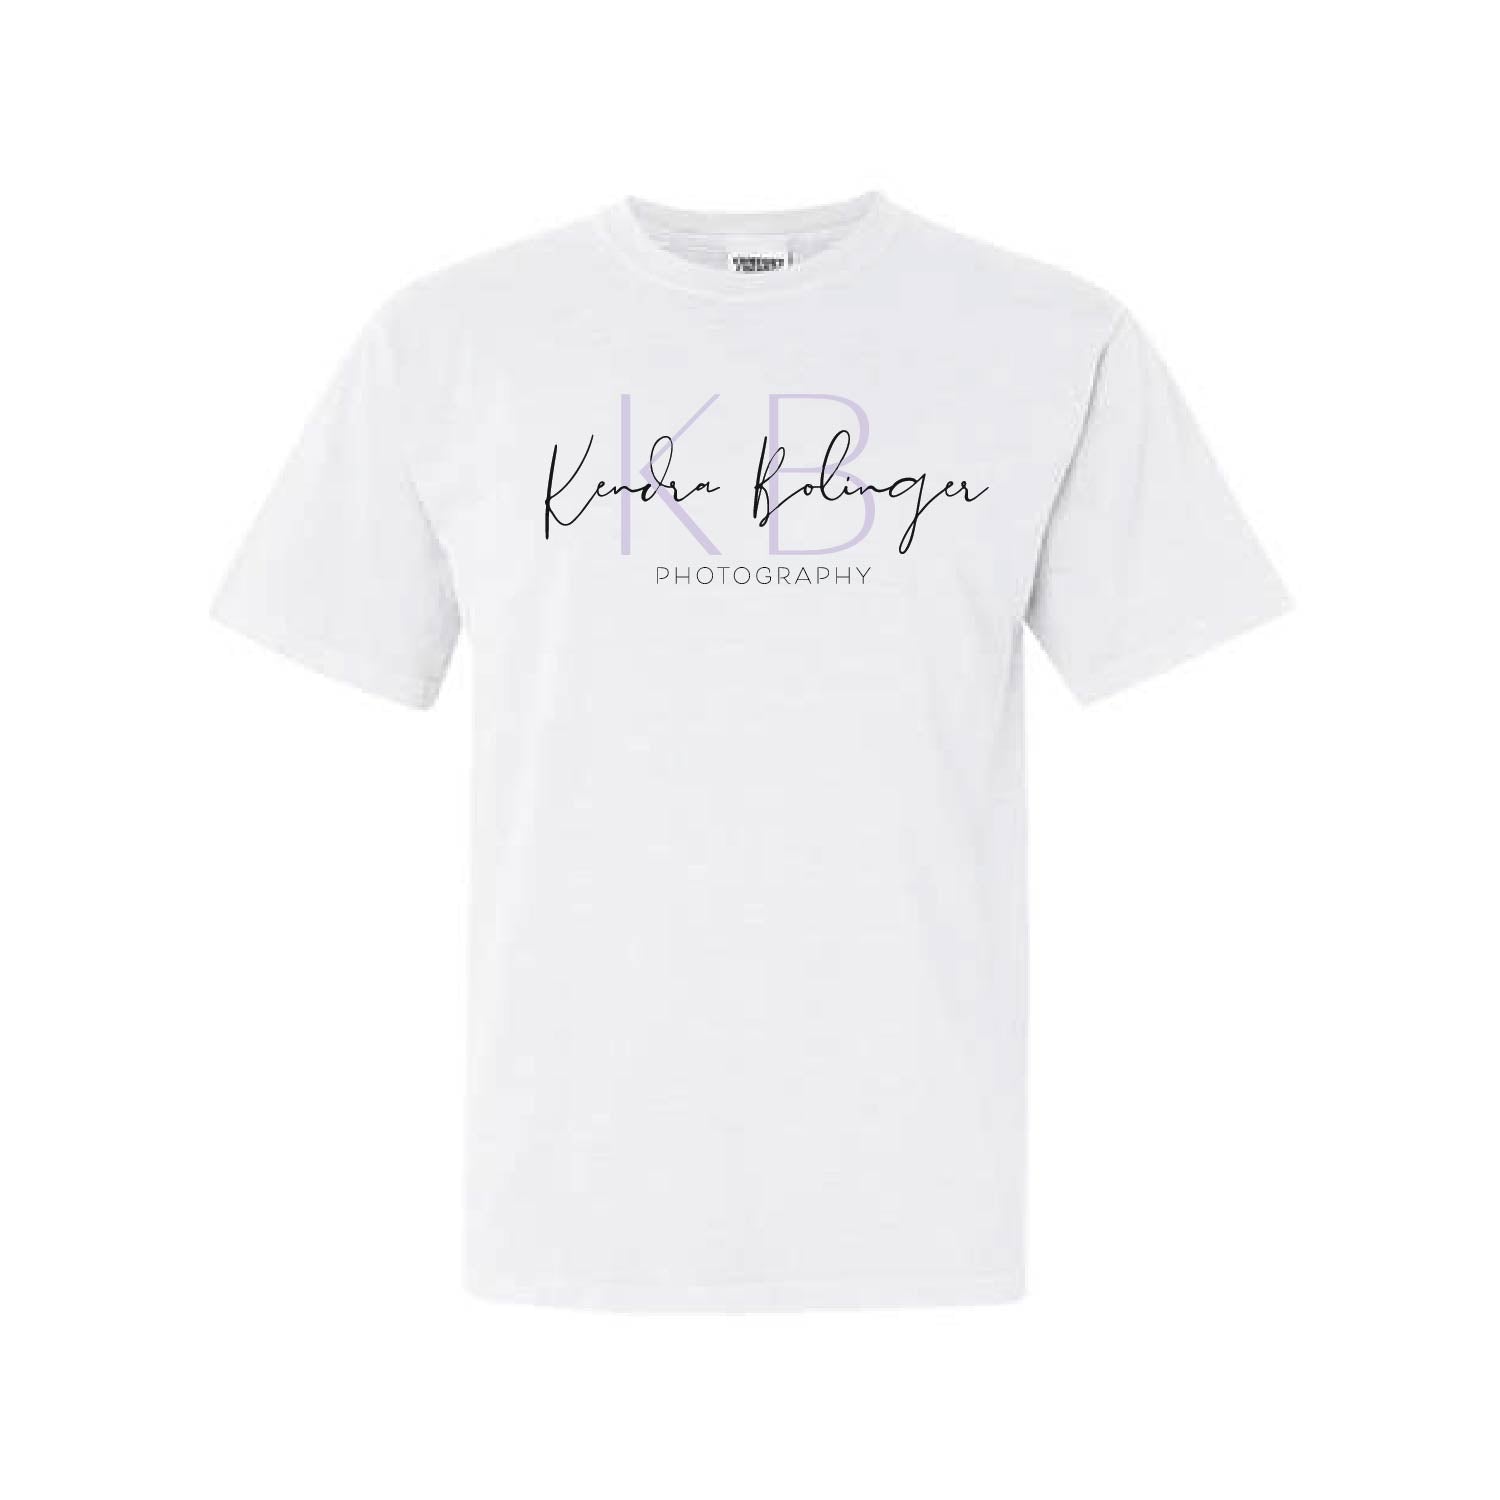 KB Photography Tees